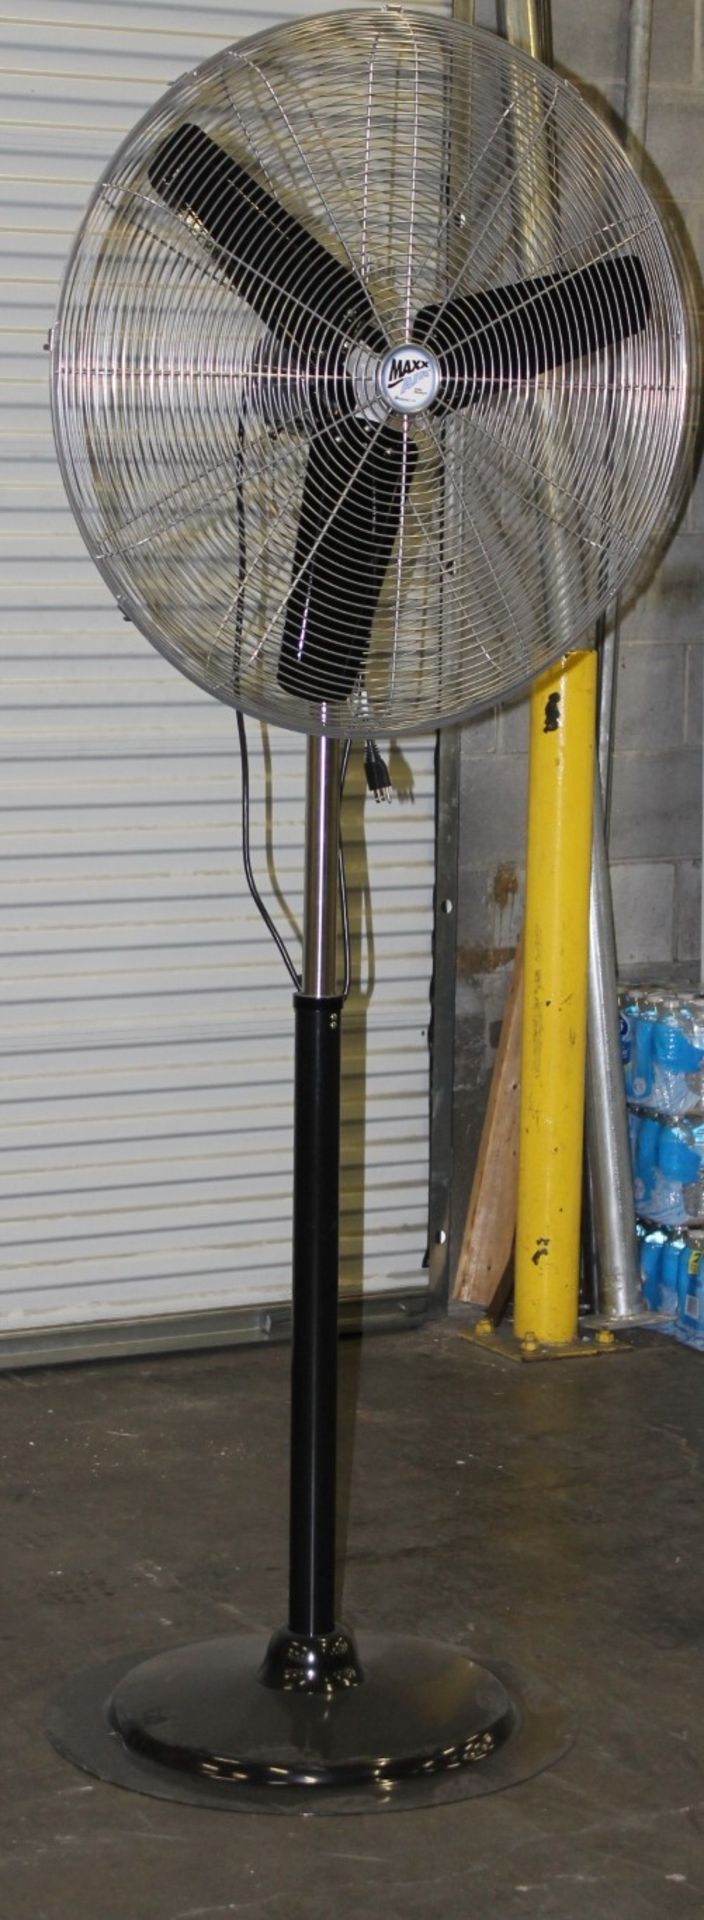 30" PEDESTAL FAN,  HEAVY DUTY 3-SPEED THERMALLY PROTECTED MOTOR, POWERFUL AIRFLOW: - Image 2 of 2